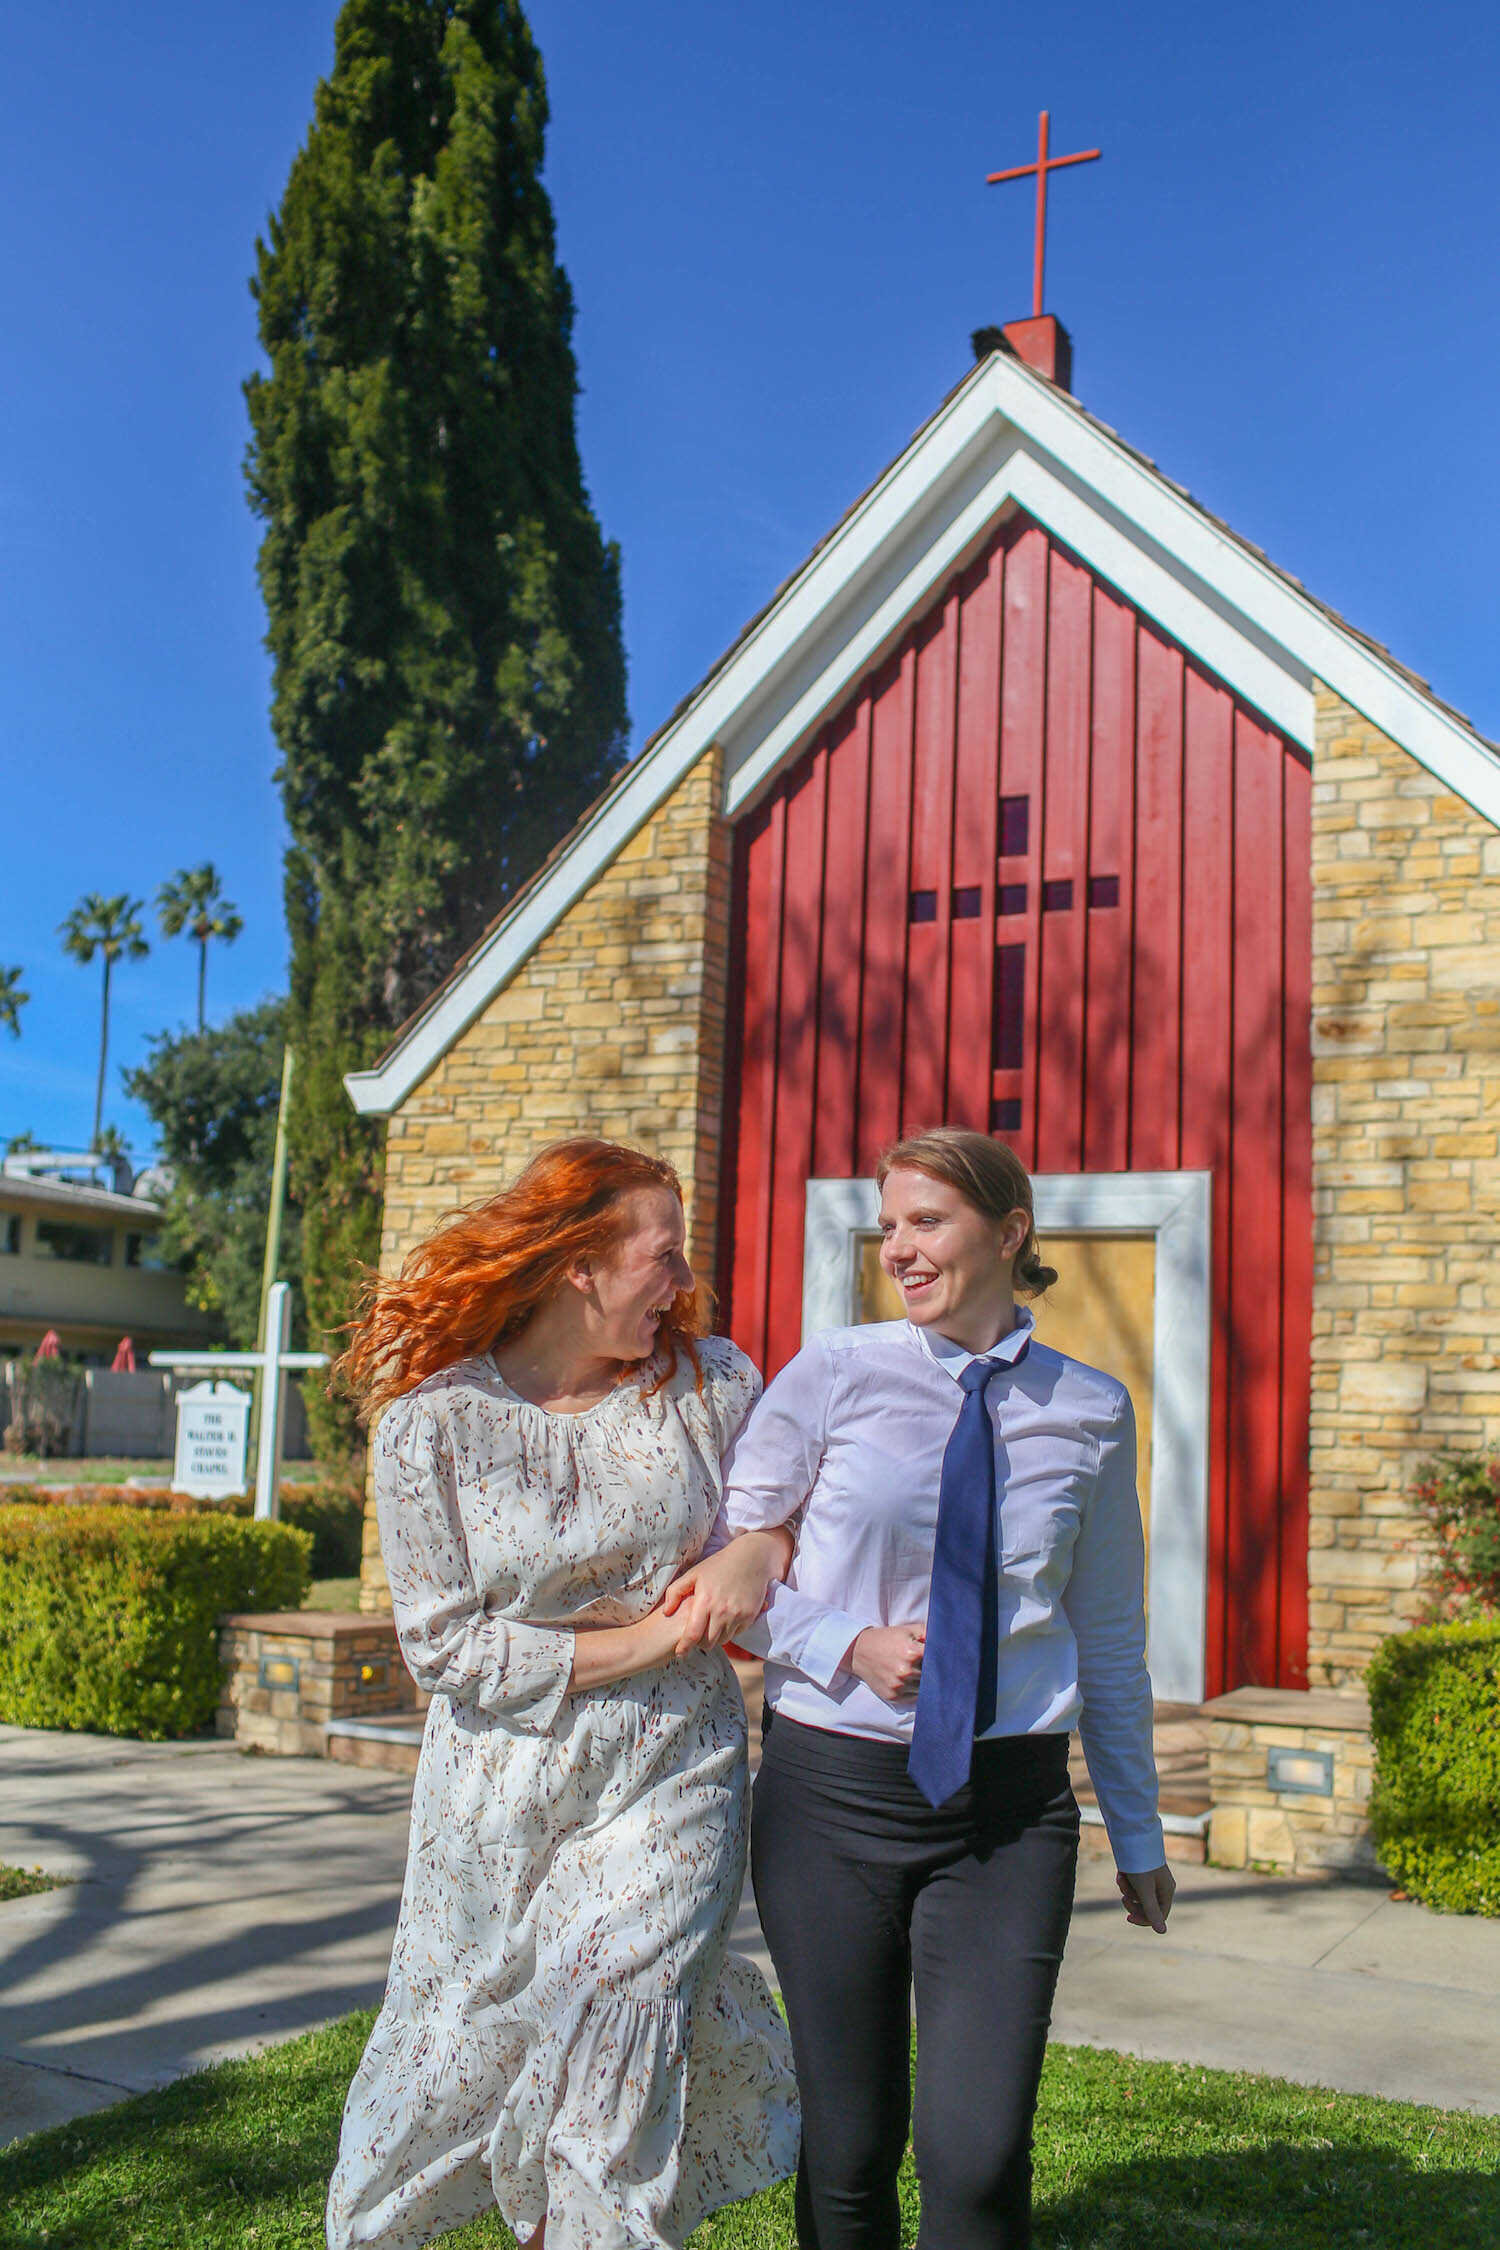 Posing in costume outside the red chapel church where Jim and Pam got married in Sherman Oaks.